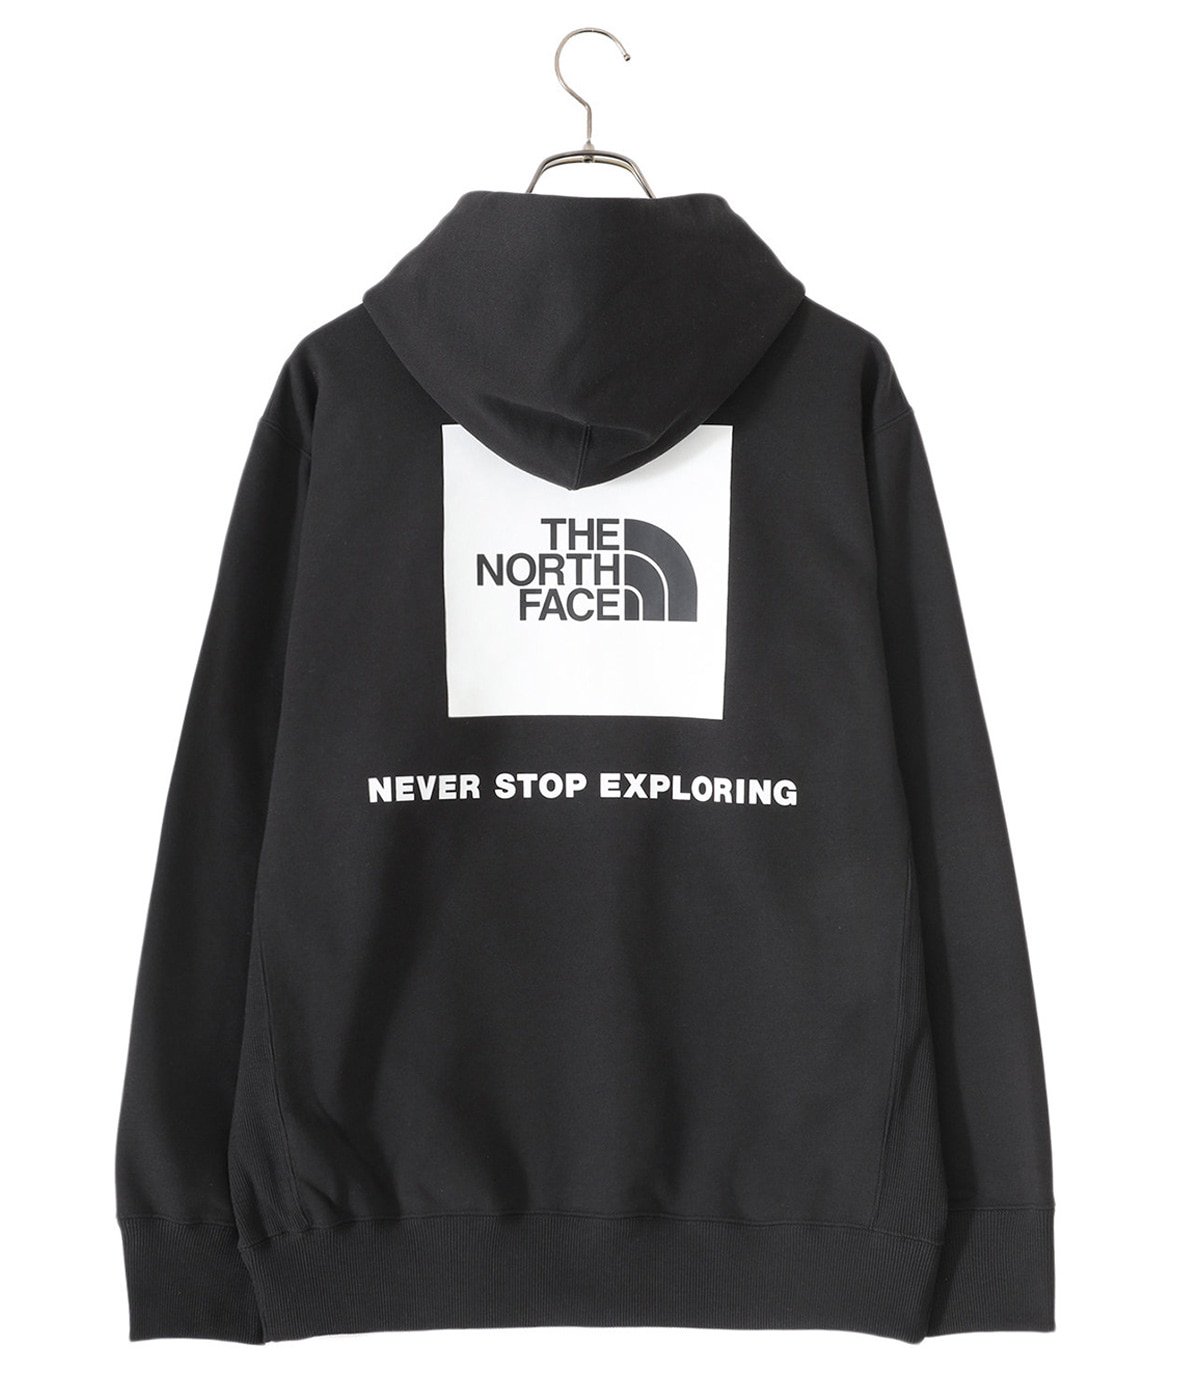 THE NORTH FACE / Square Logo Hoodie 黒 XL